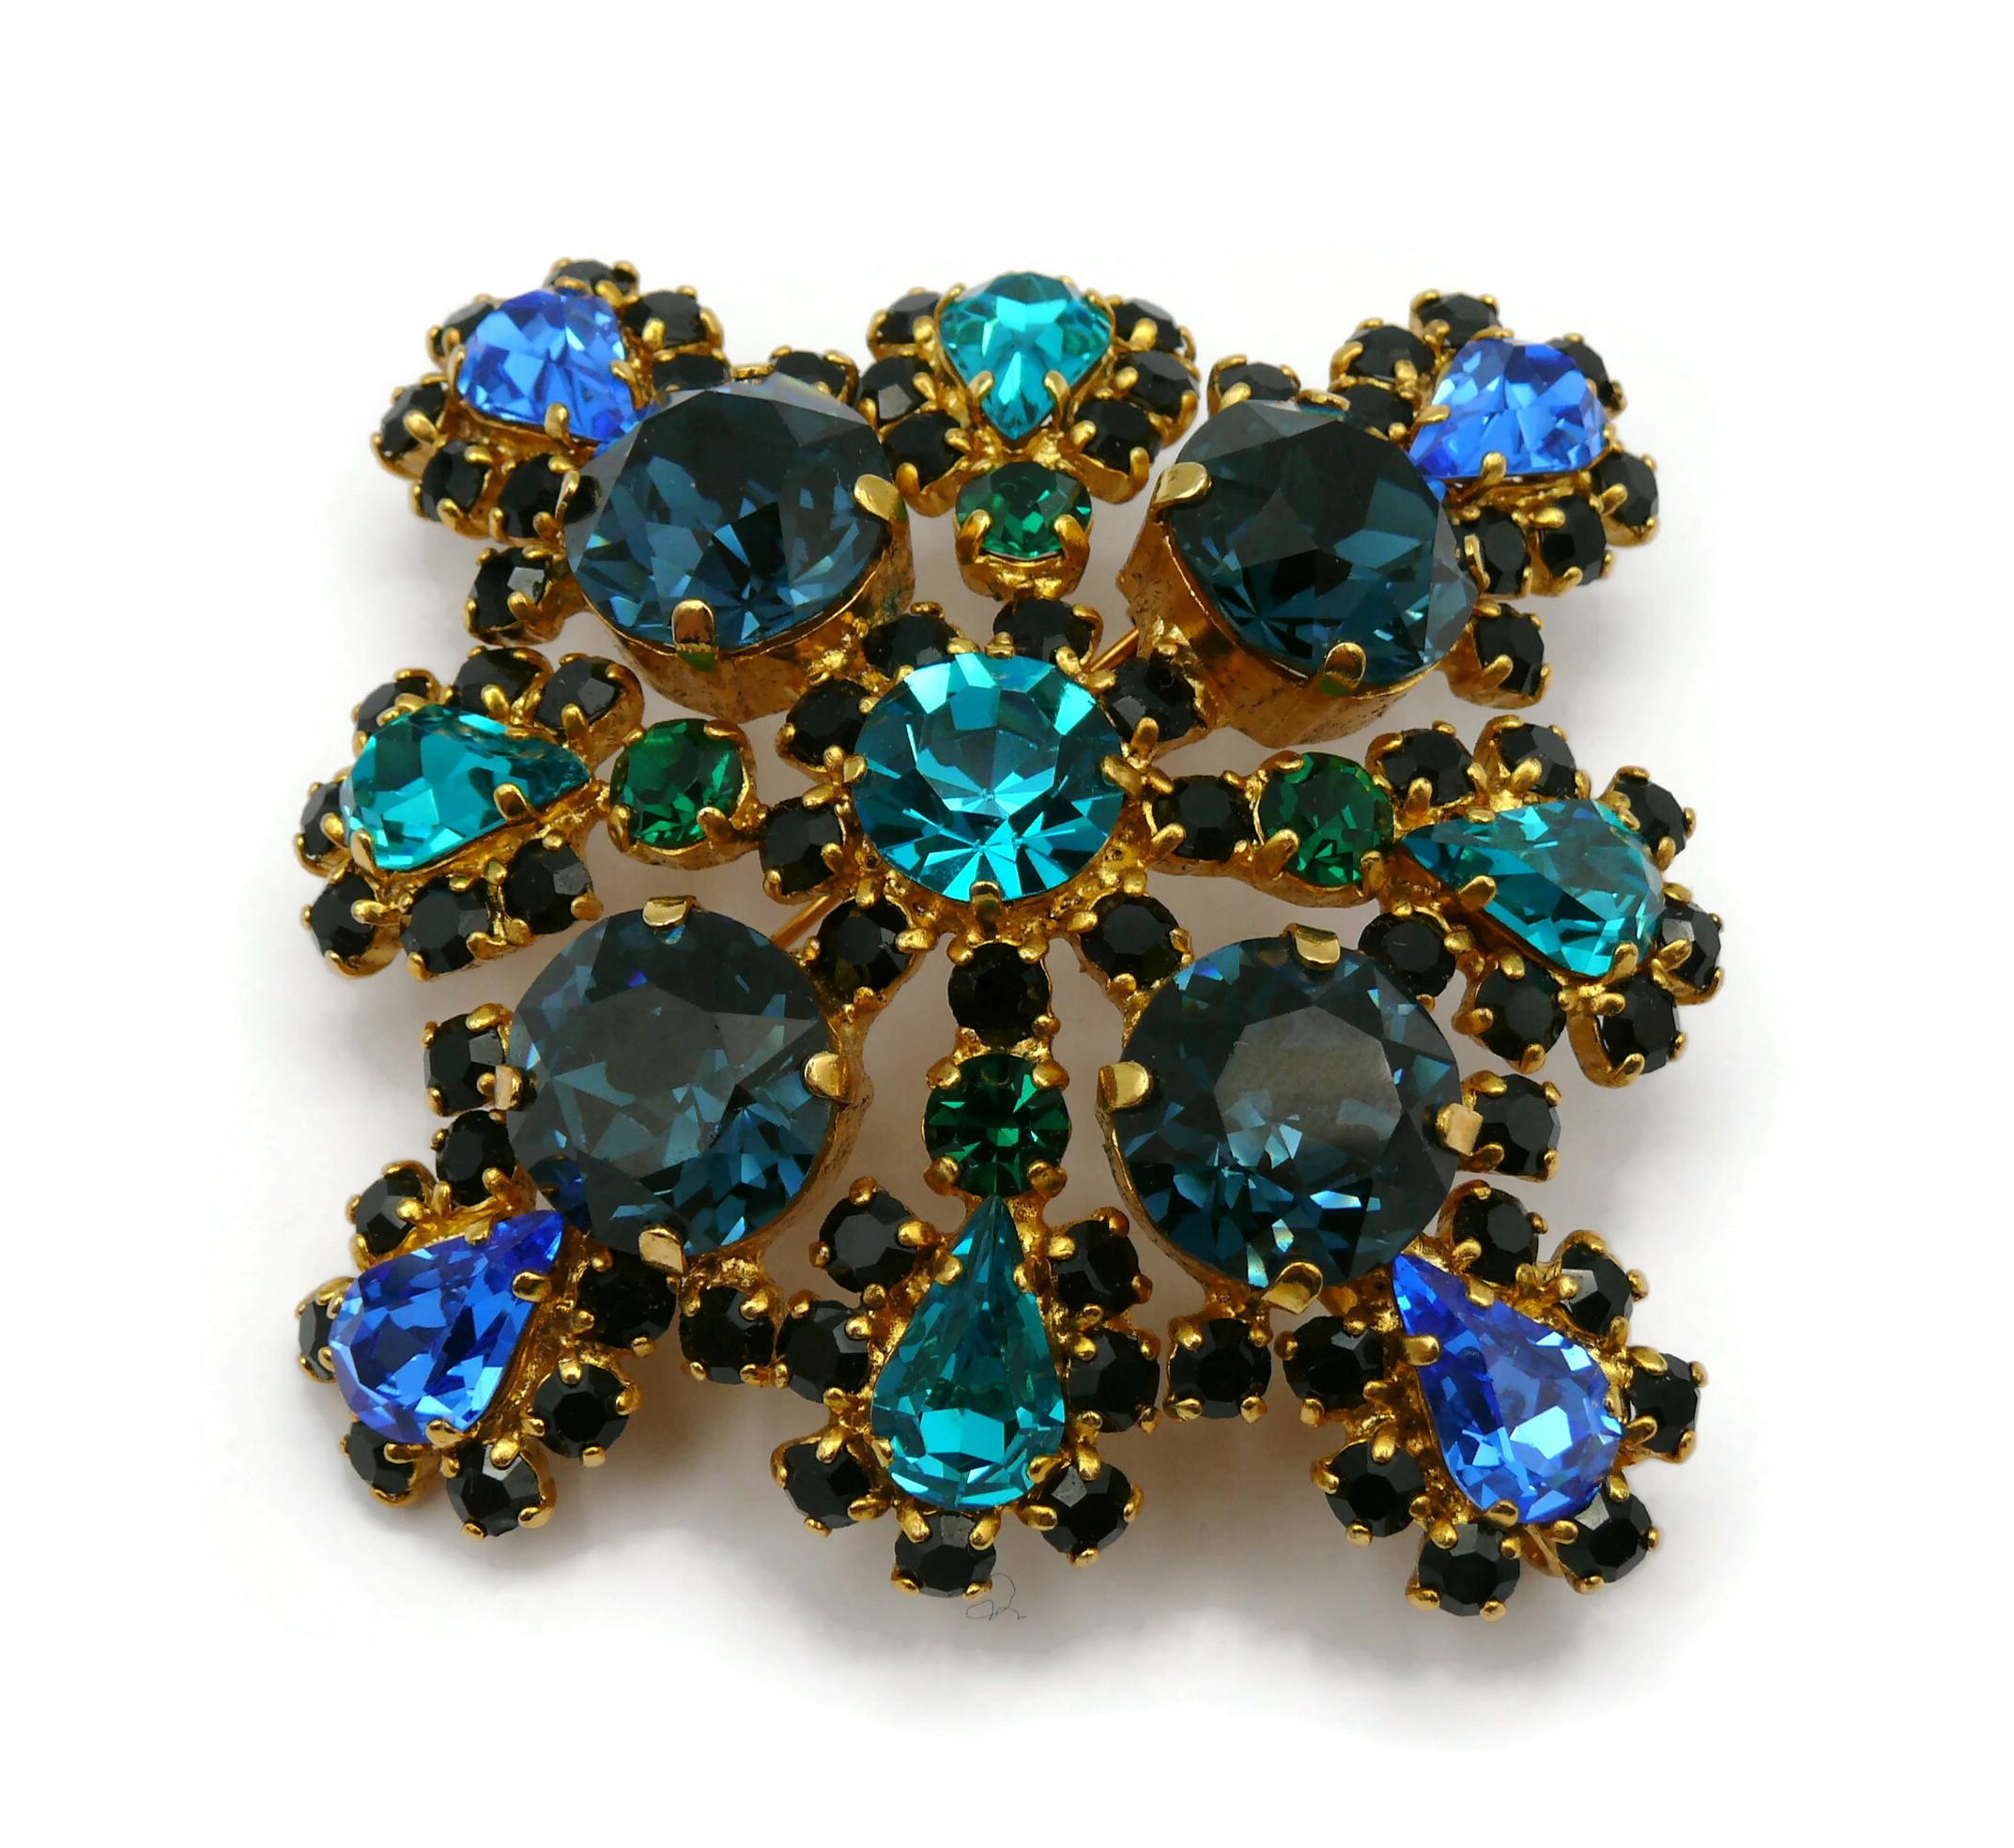 CHRISTIAN DIOR by GIANFRANCO FERRE Vintage Massive Jewelled Brooch Pendant For Sale 4